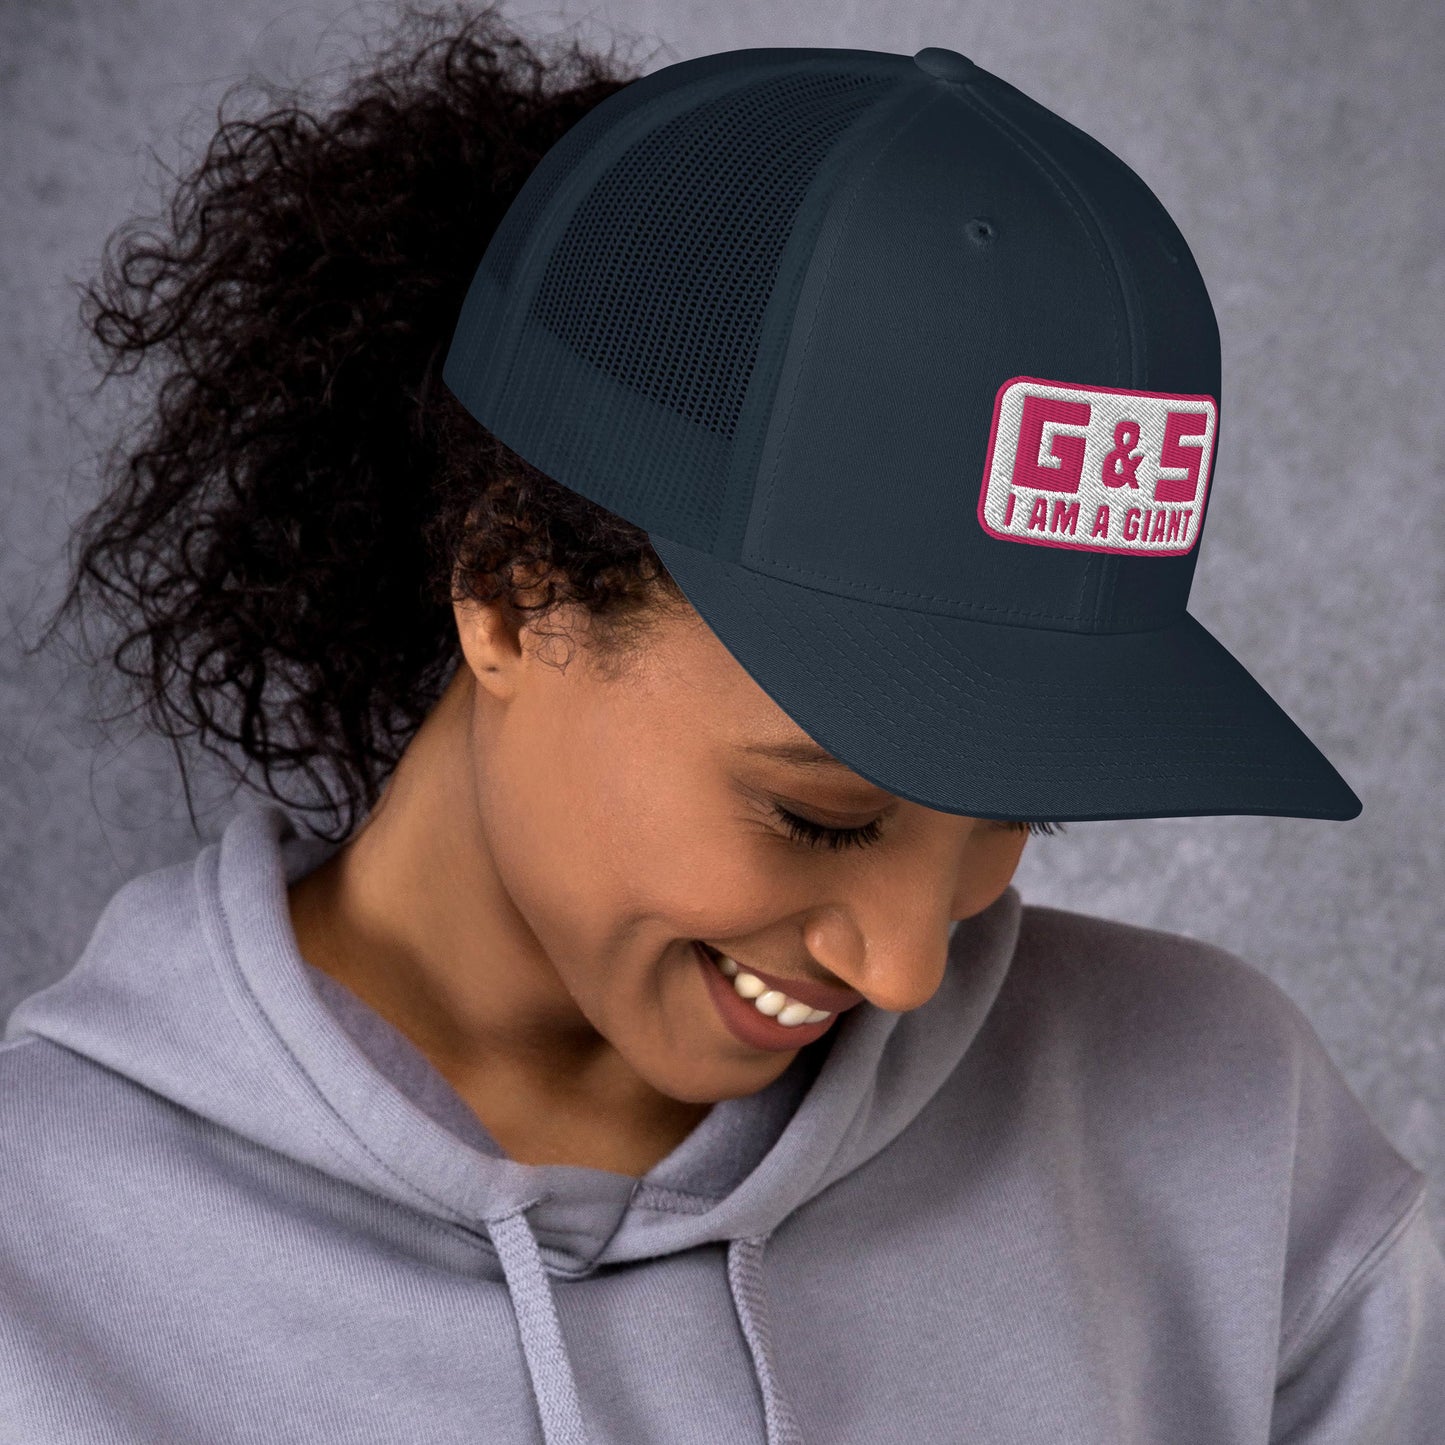 G & S I AM A GIANT Pink Lettering Trucker Cap